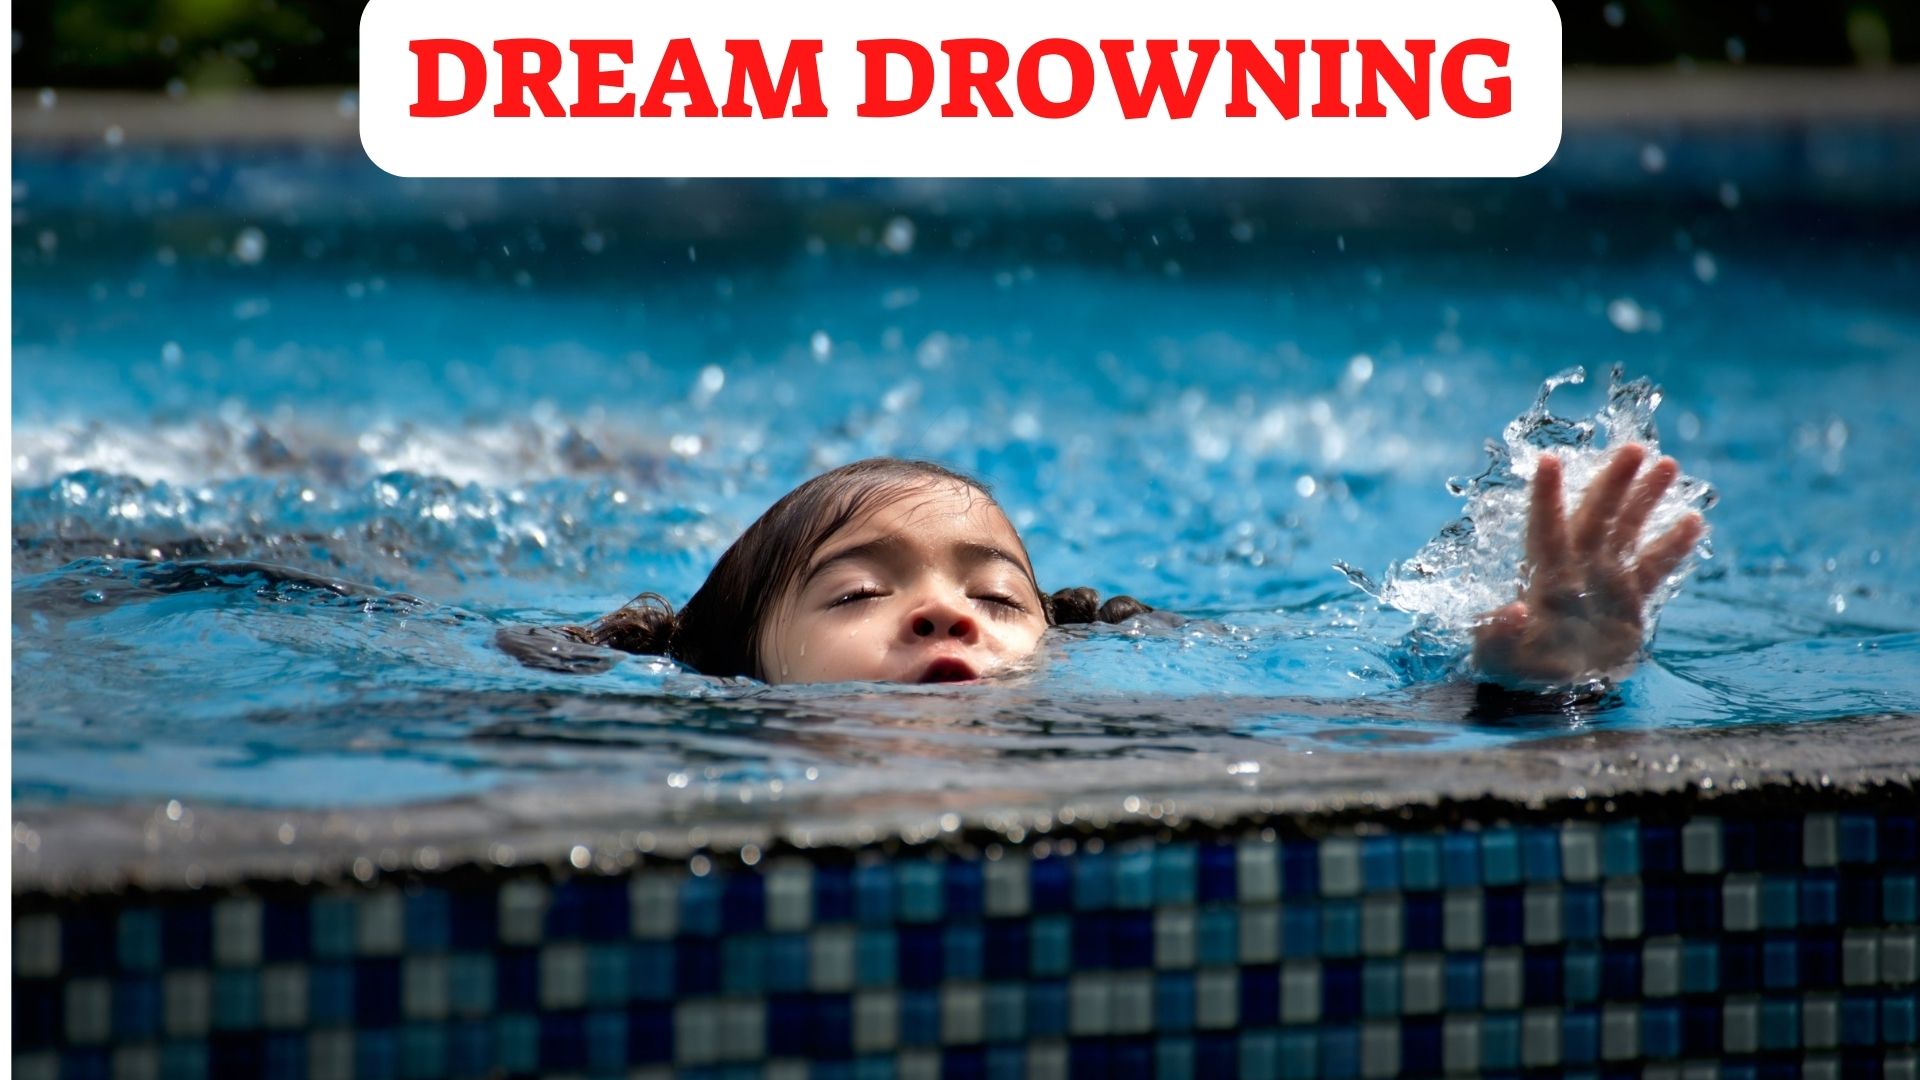 Dream Drowning Symbolizes Losing Control Or Losing Oneself